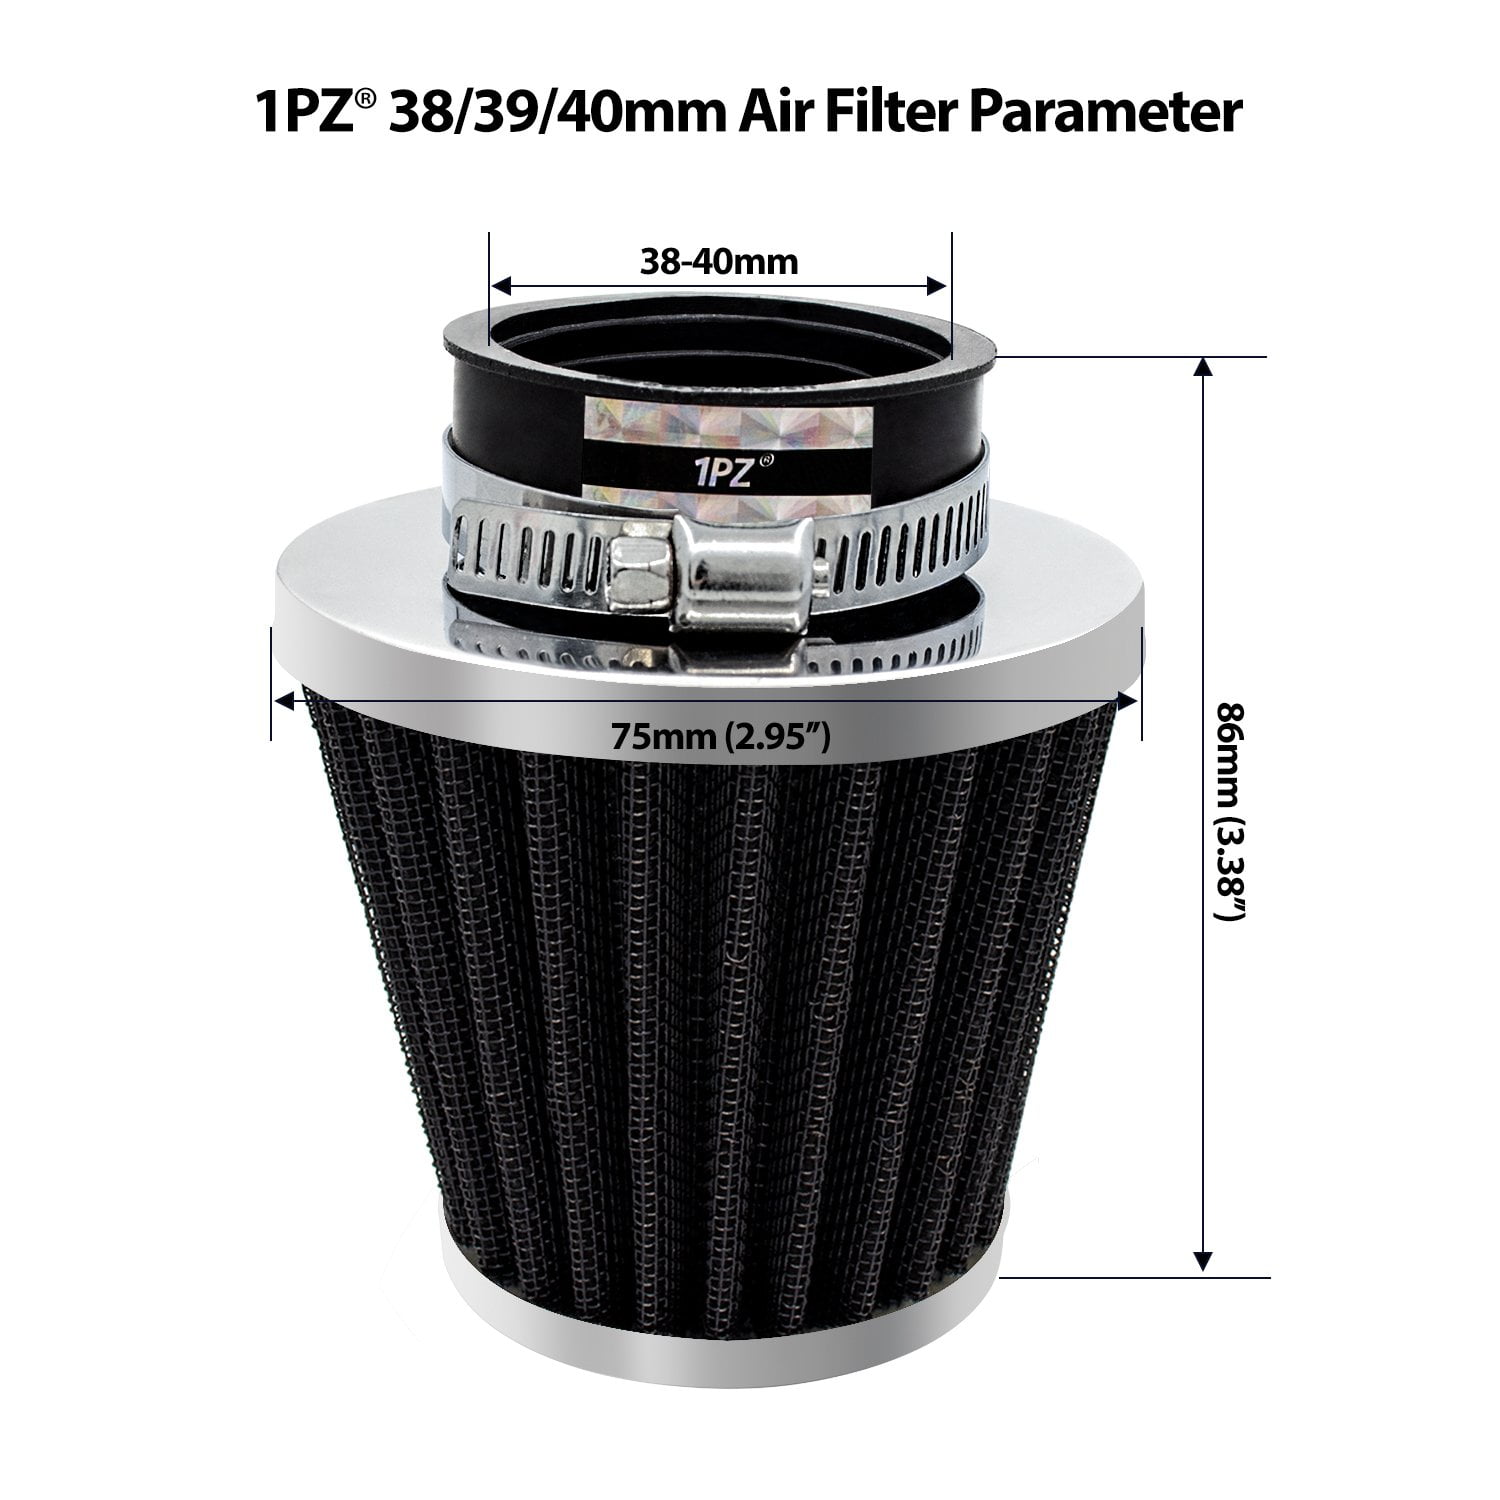 Black CNCMOTOK 38mm Air Filter For 90cc 110cc 125cc Dirt Pit Bike Chinese GY6 50cc QMB139 Moped Scooter Off Road Motorcycle ATV Quad XR50 CRF50 CRF70 XR CRF KLX Apollo SSR Lifan Engine Parts 